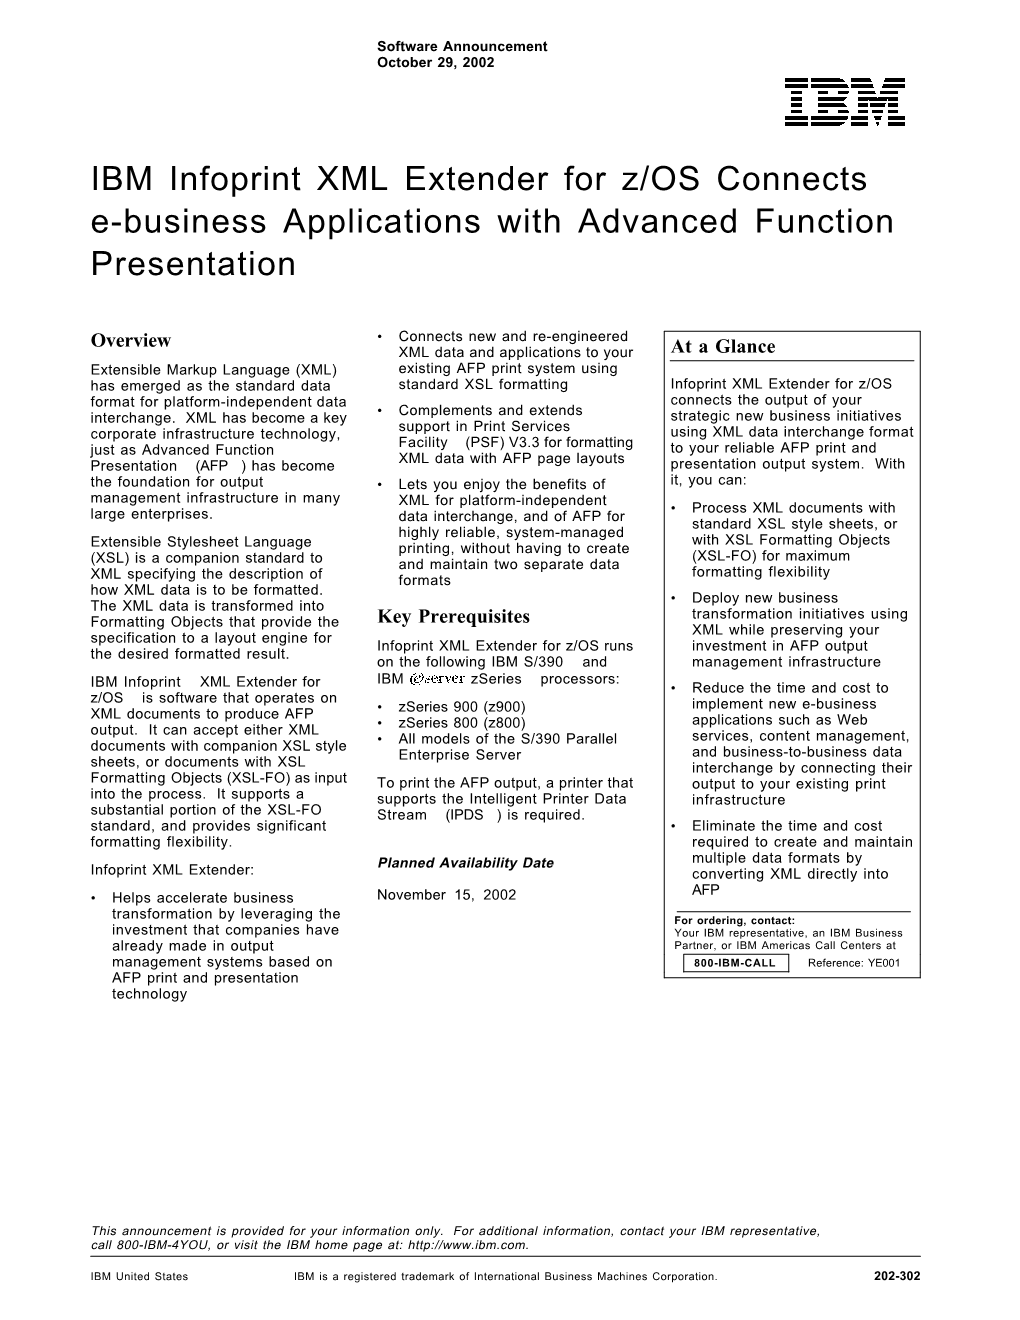 IBM Infoprint XML Extender for Z/OS Connects E-Business Applications with Advanced Function Presentation